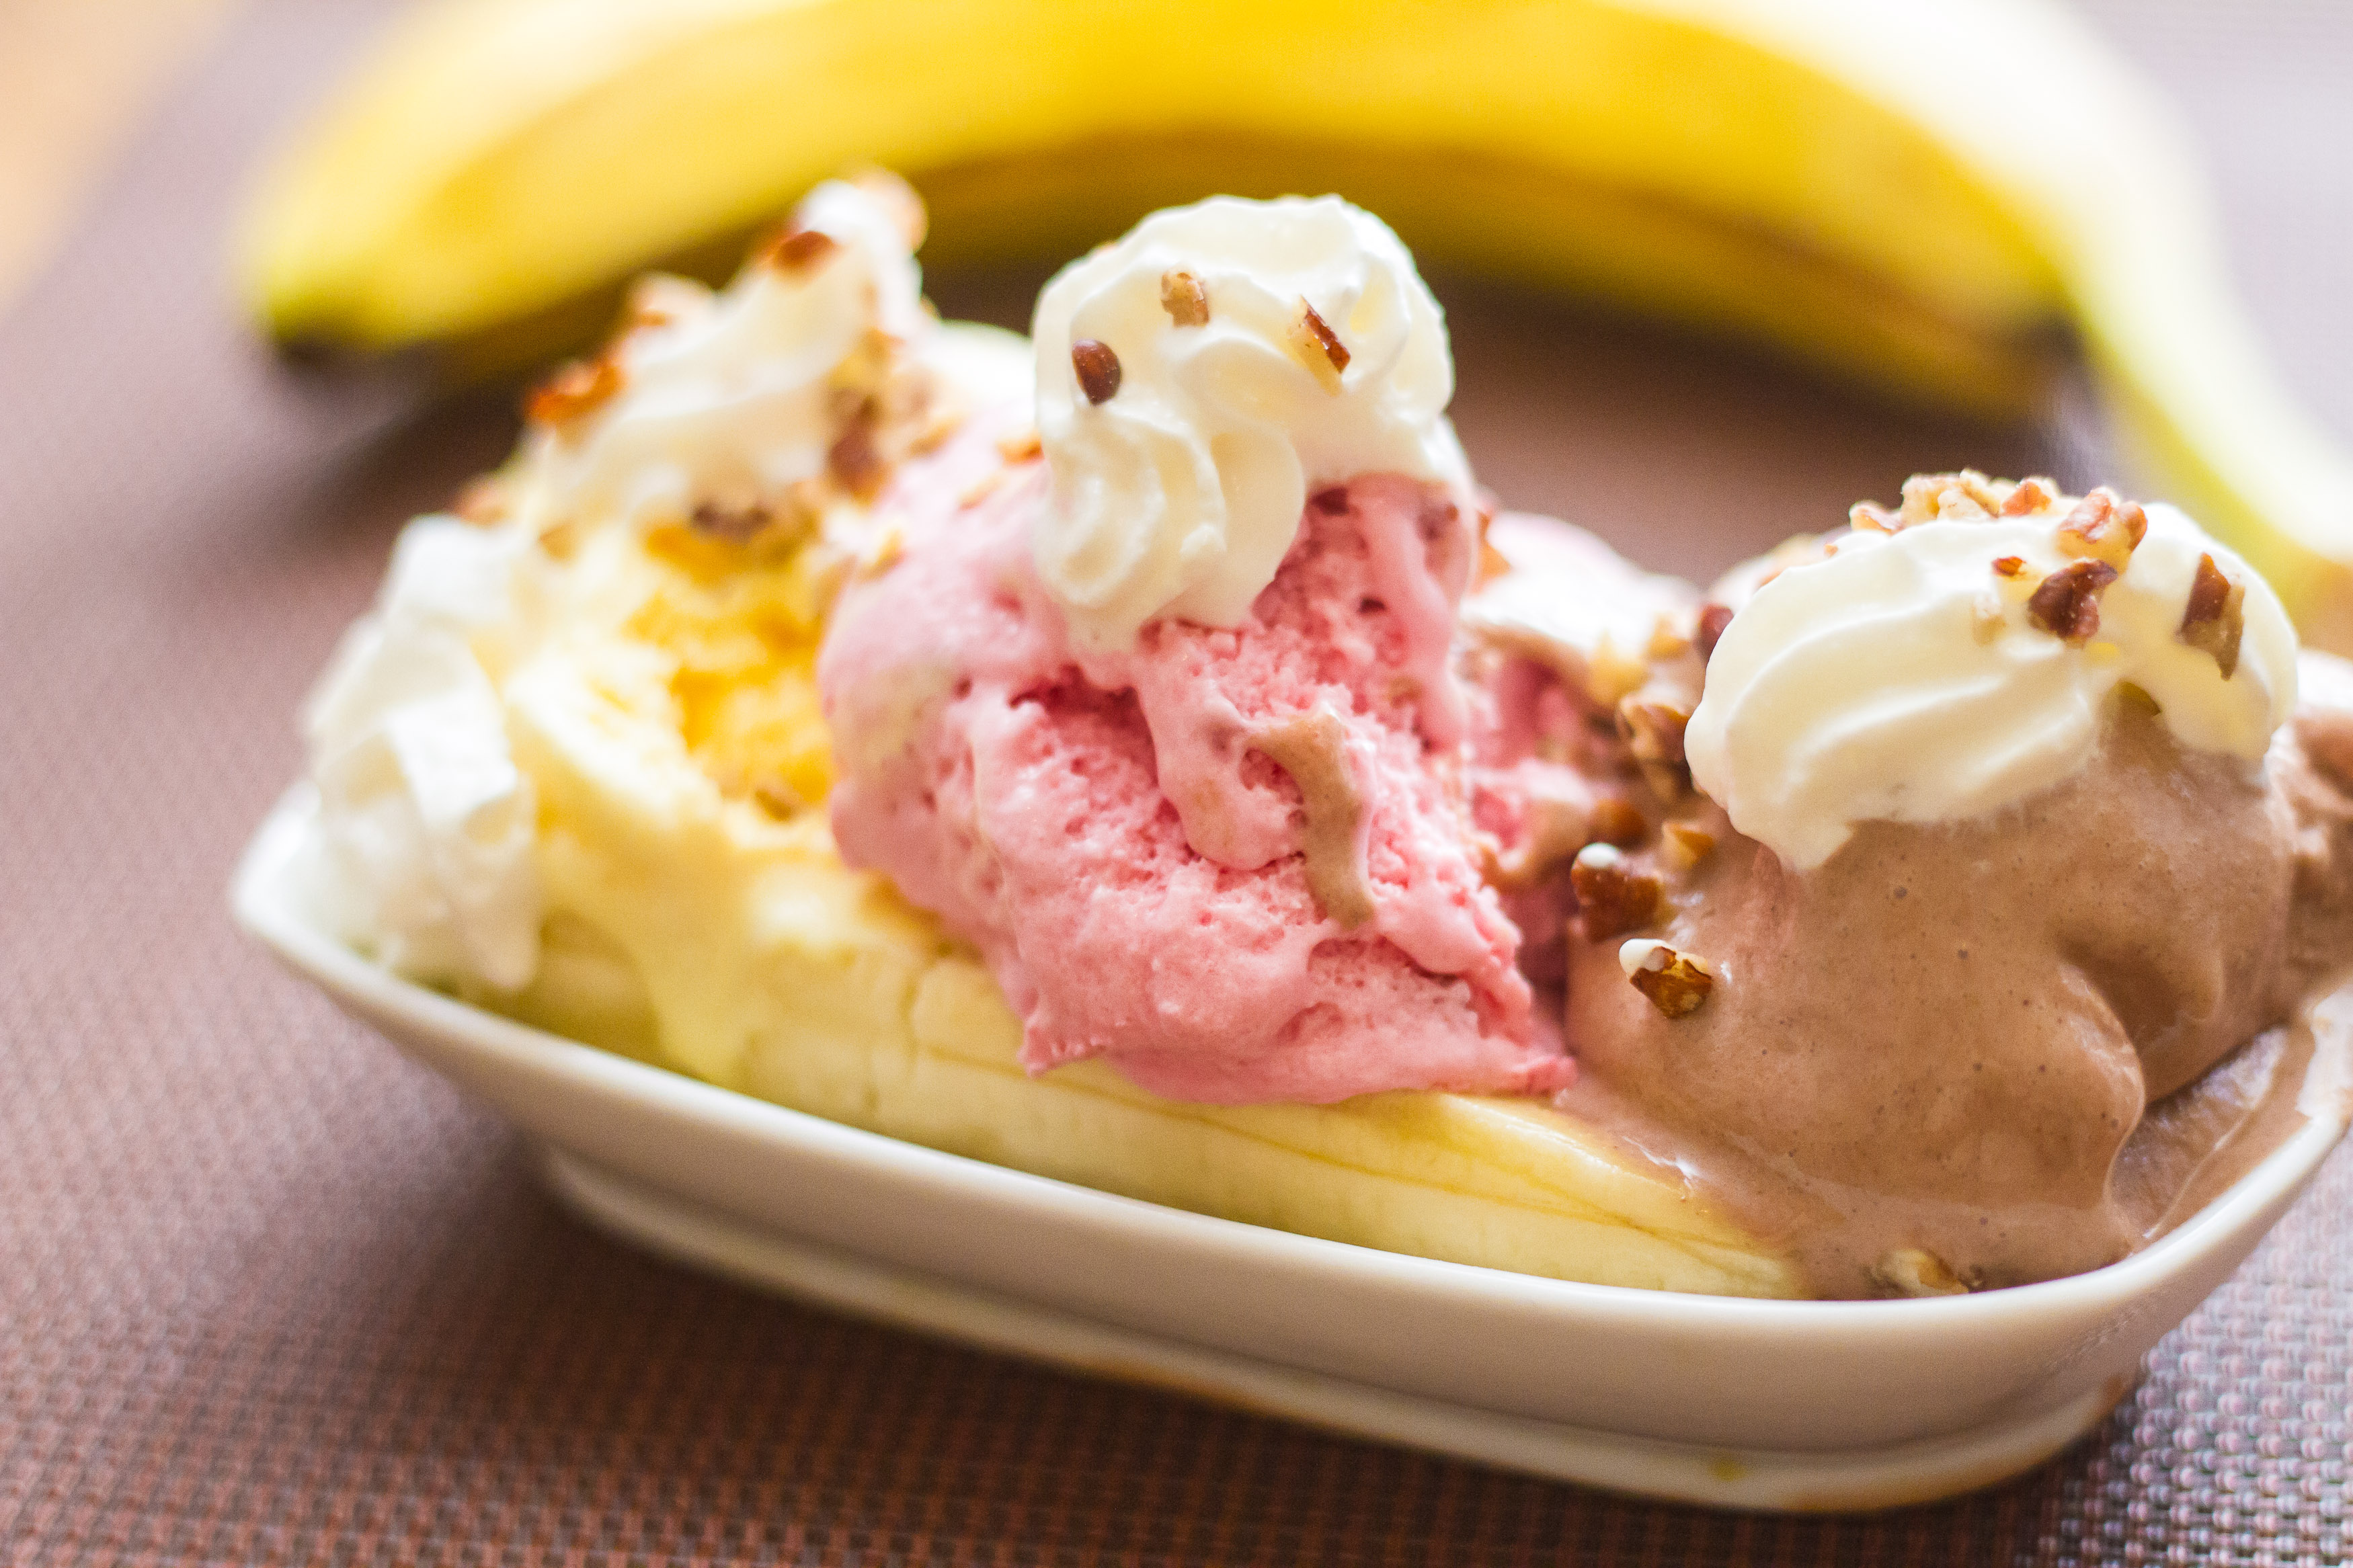 How to Make Banana Splits with Fruit: 11 Steps (with Pictures)